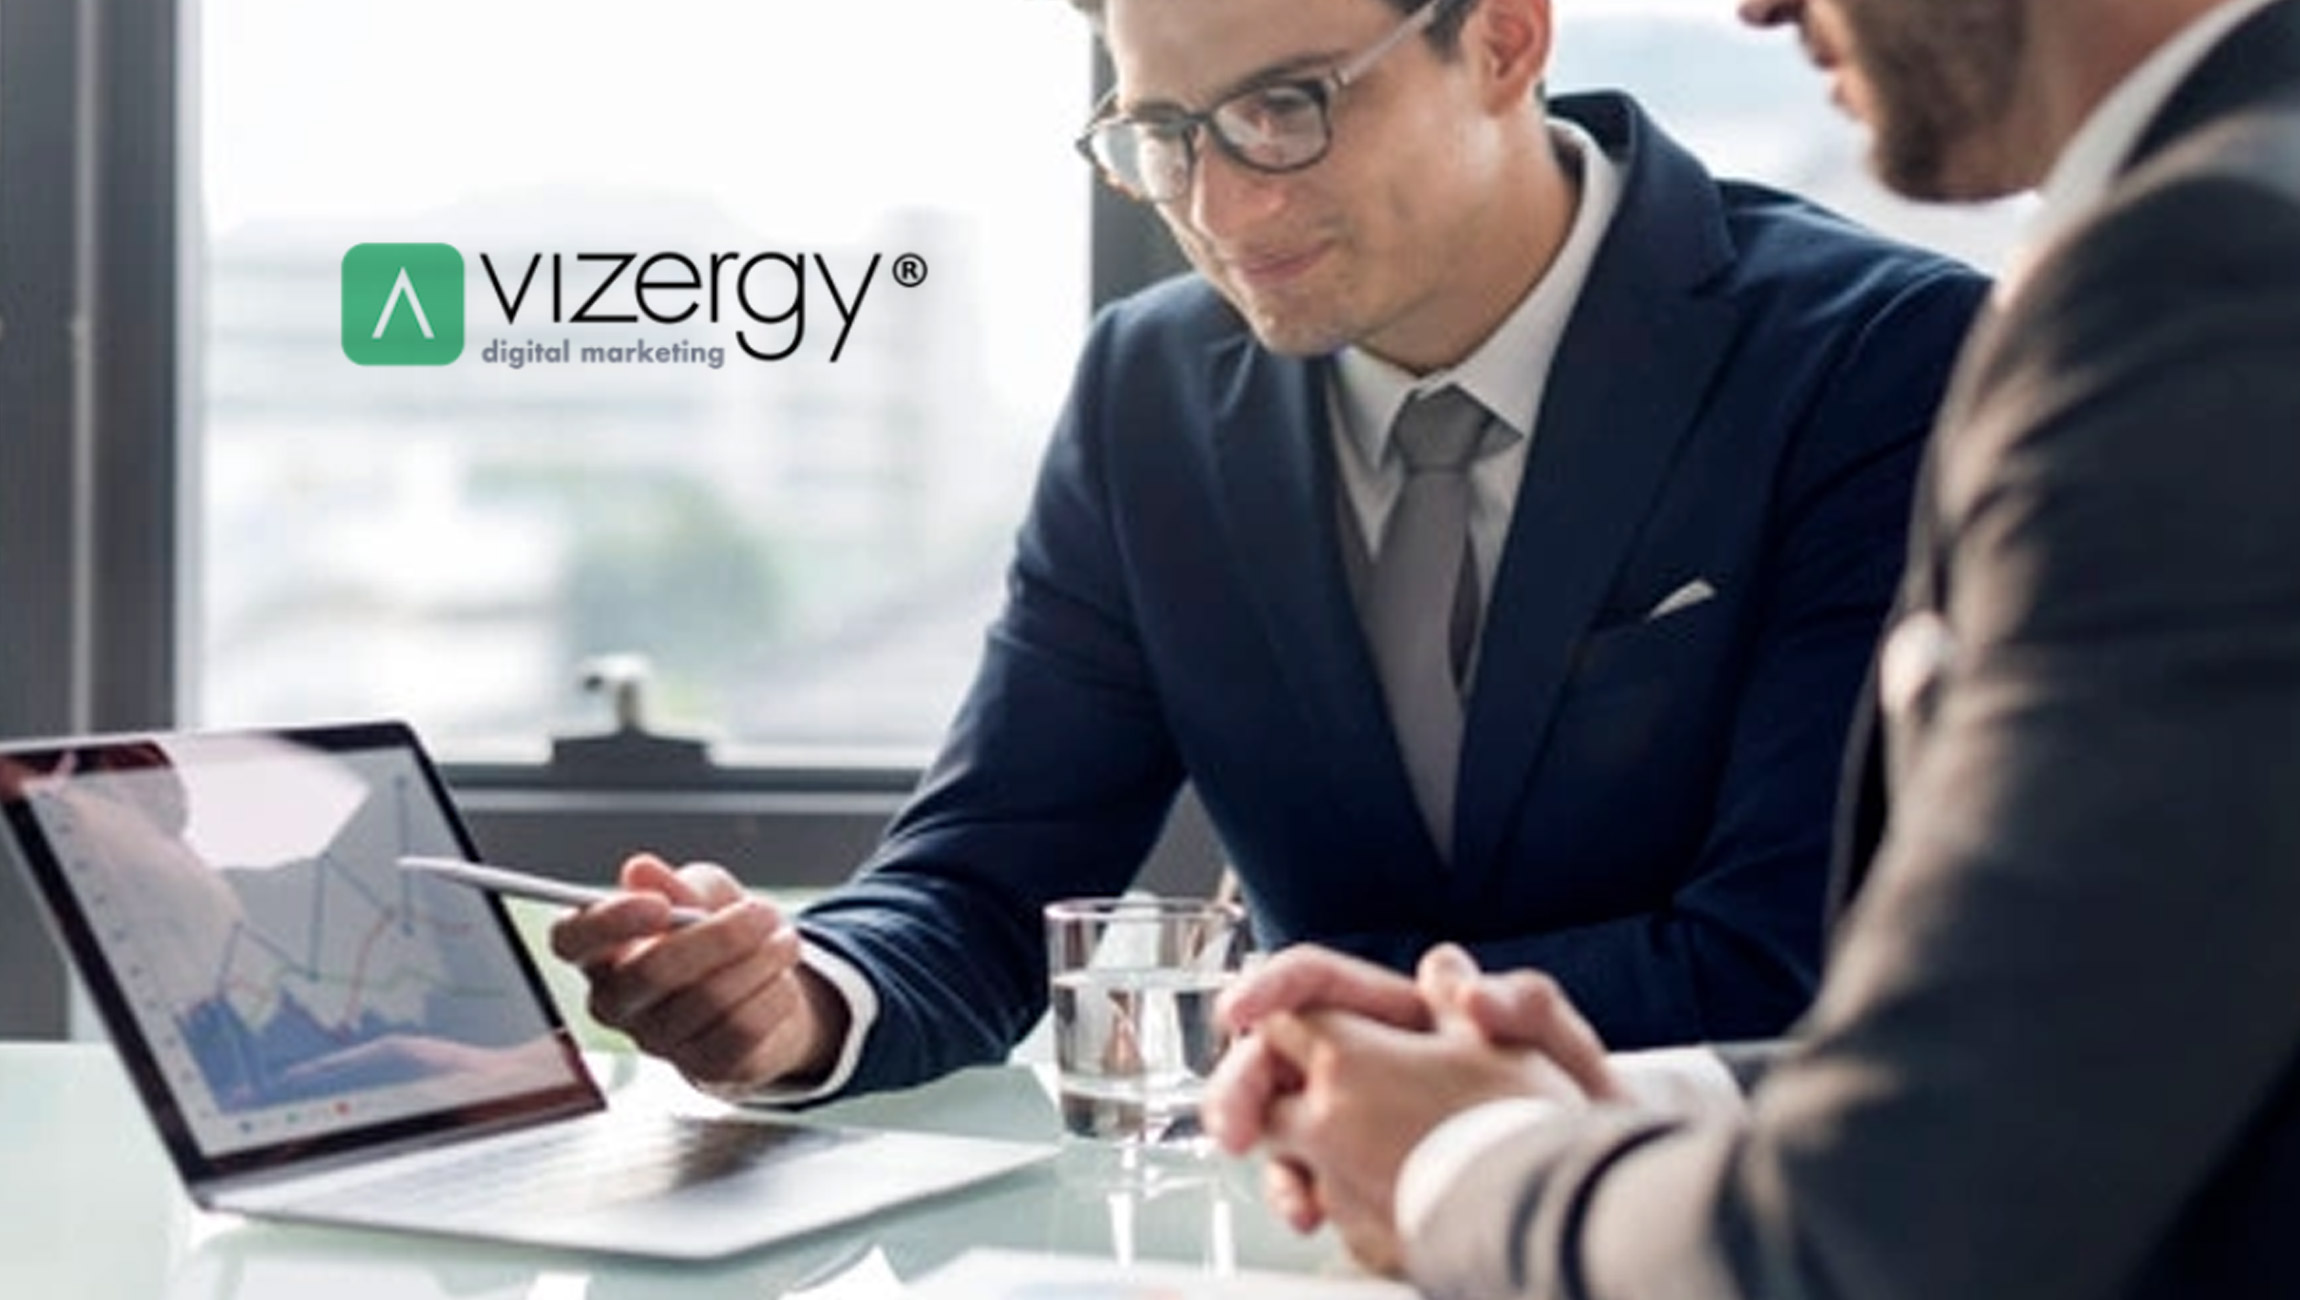 Vizergy® Named Partner of the Year for Its Leading-Edge Digital Sales and Marketing Platform